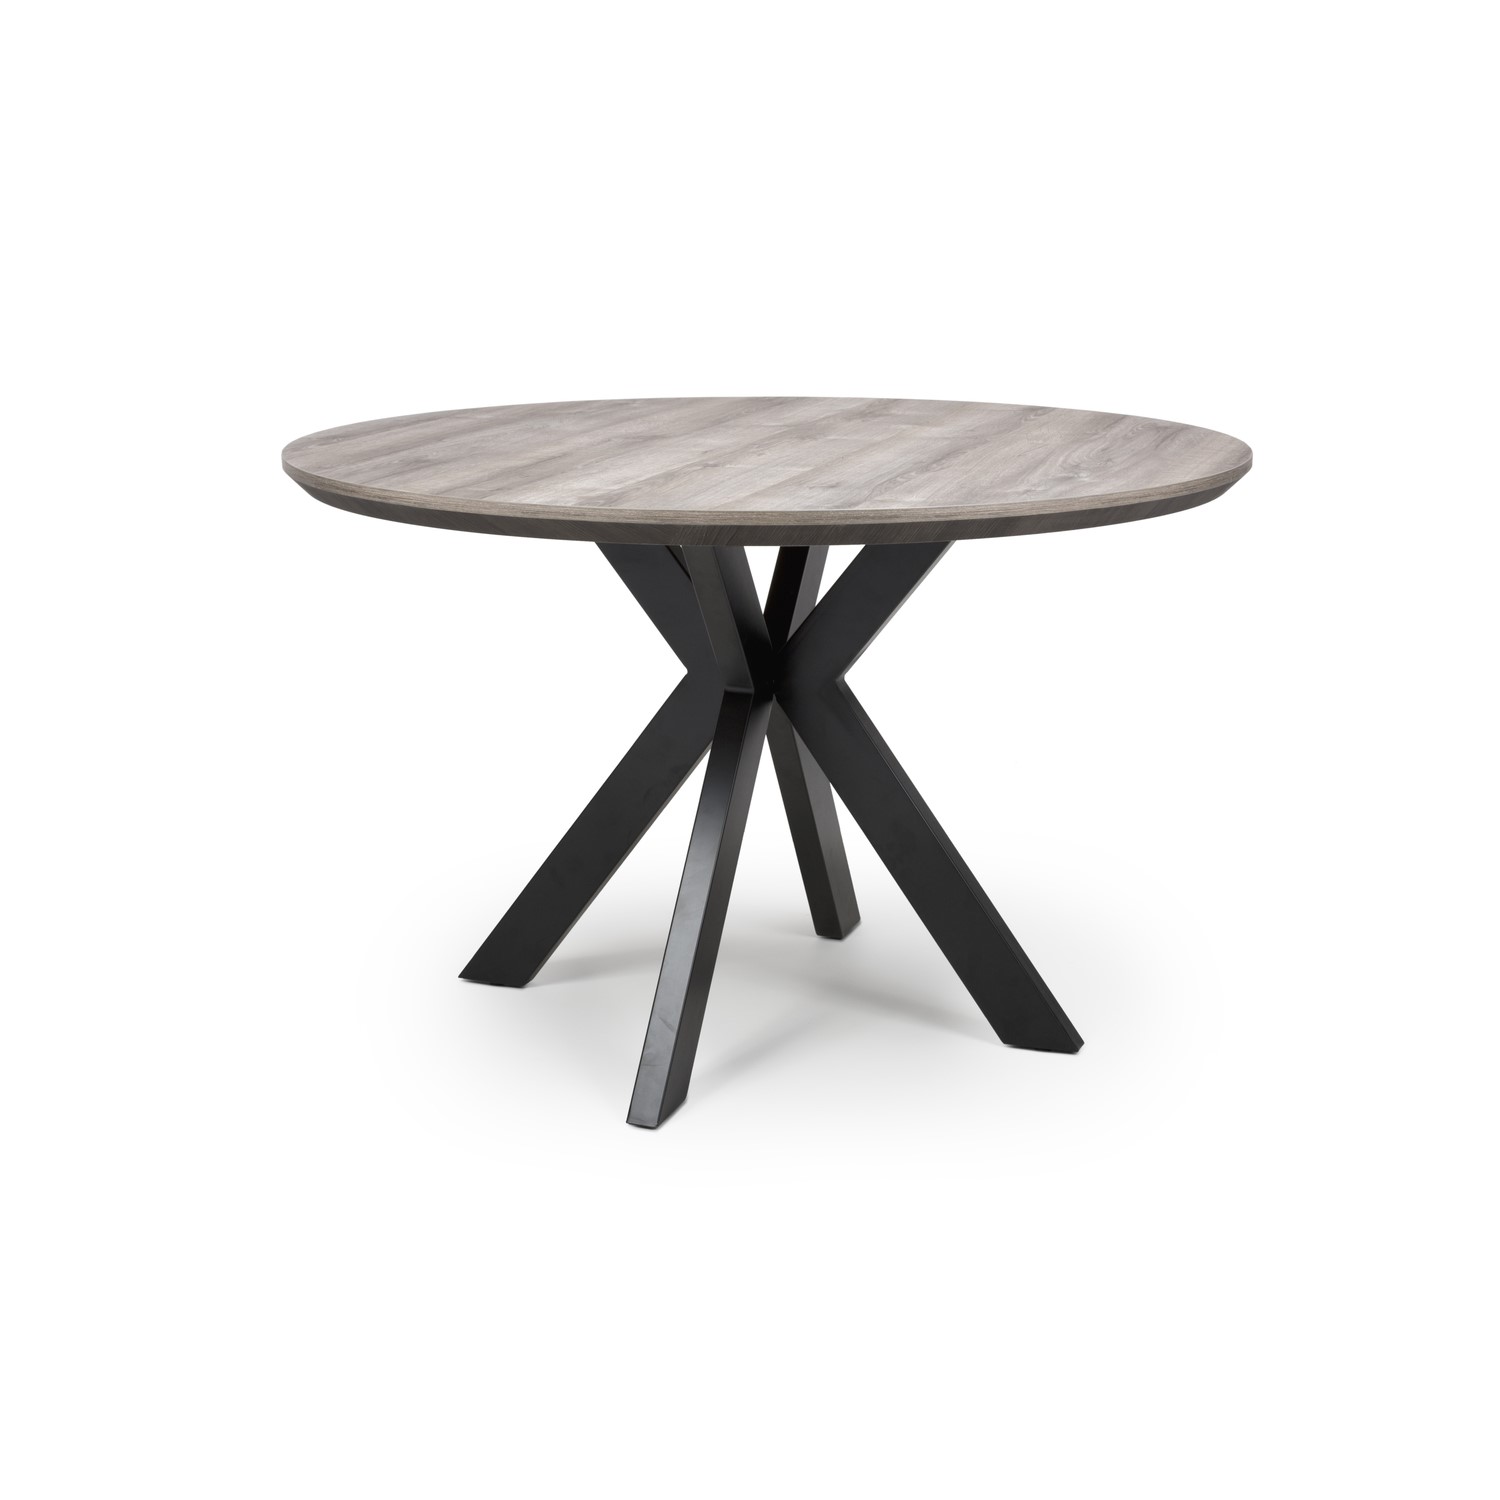 Round grey wood dining table - seats 6 - liberty £439.97 | Save up to ...